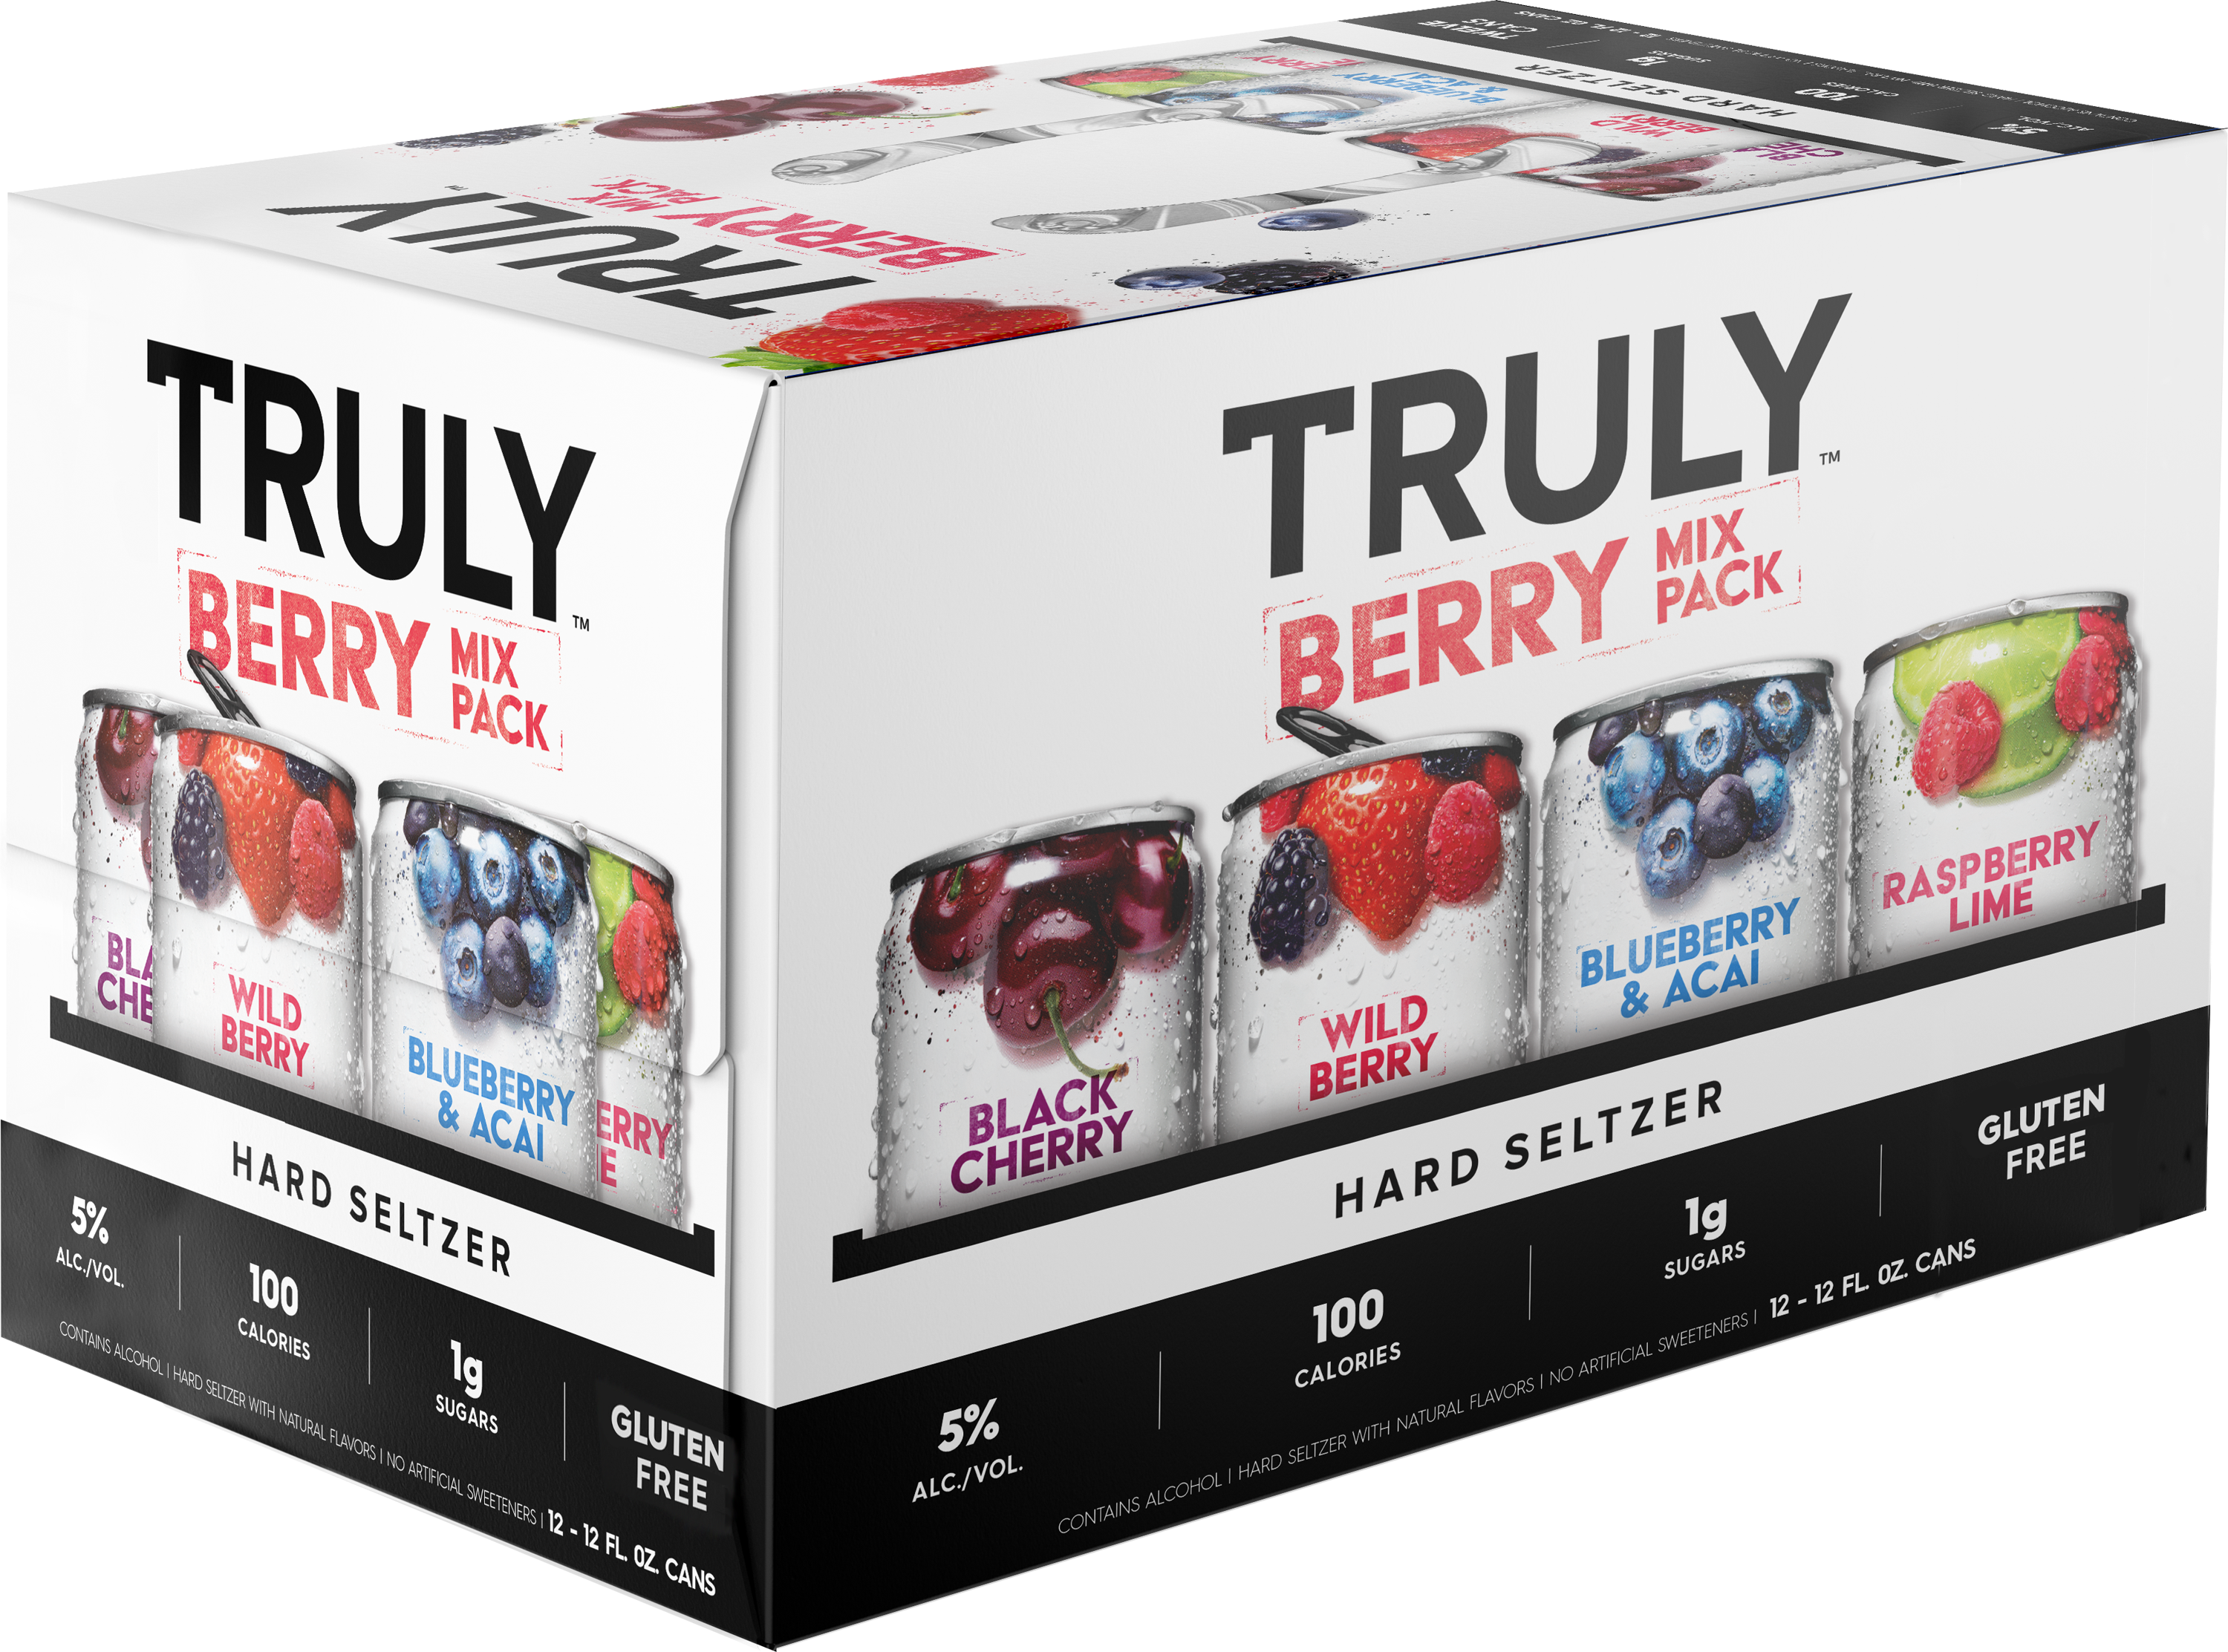 Truly Berry Variety Mix Pack